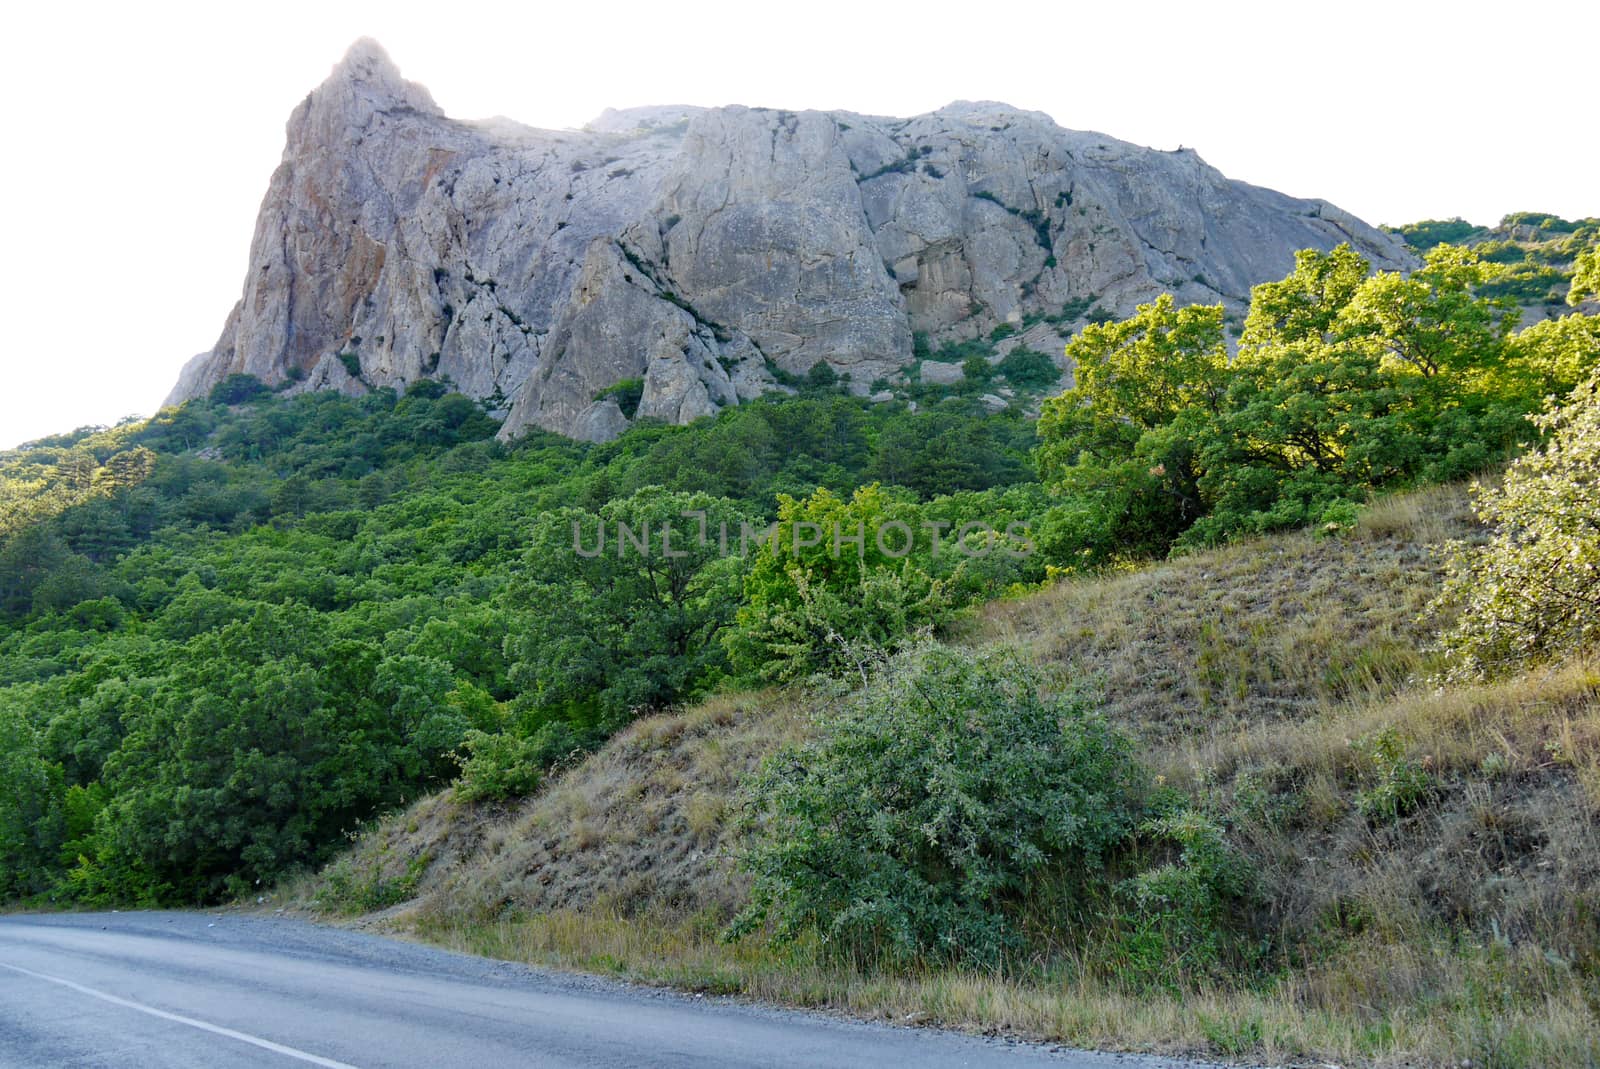 The road on the background of a high gray cliff is surrounded by green dense forest by Adamchuk